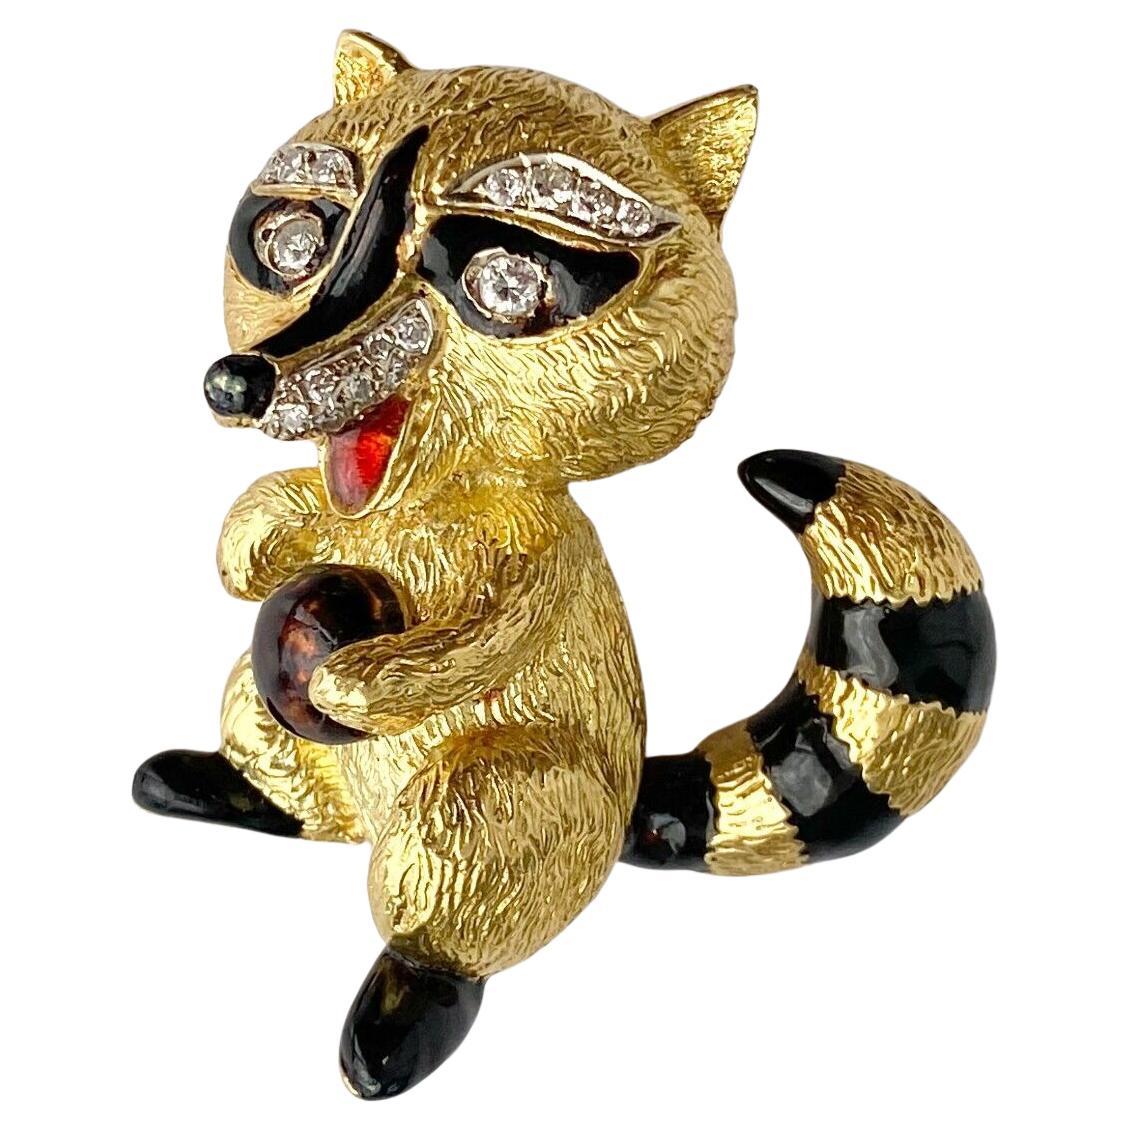 Antique 14k Yellow Gold "Raccoon" Diamond and Enamel Pendant-Brooch For Sale